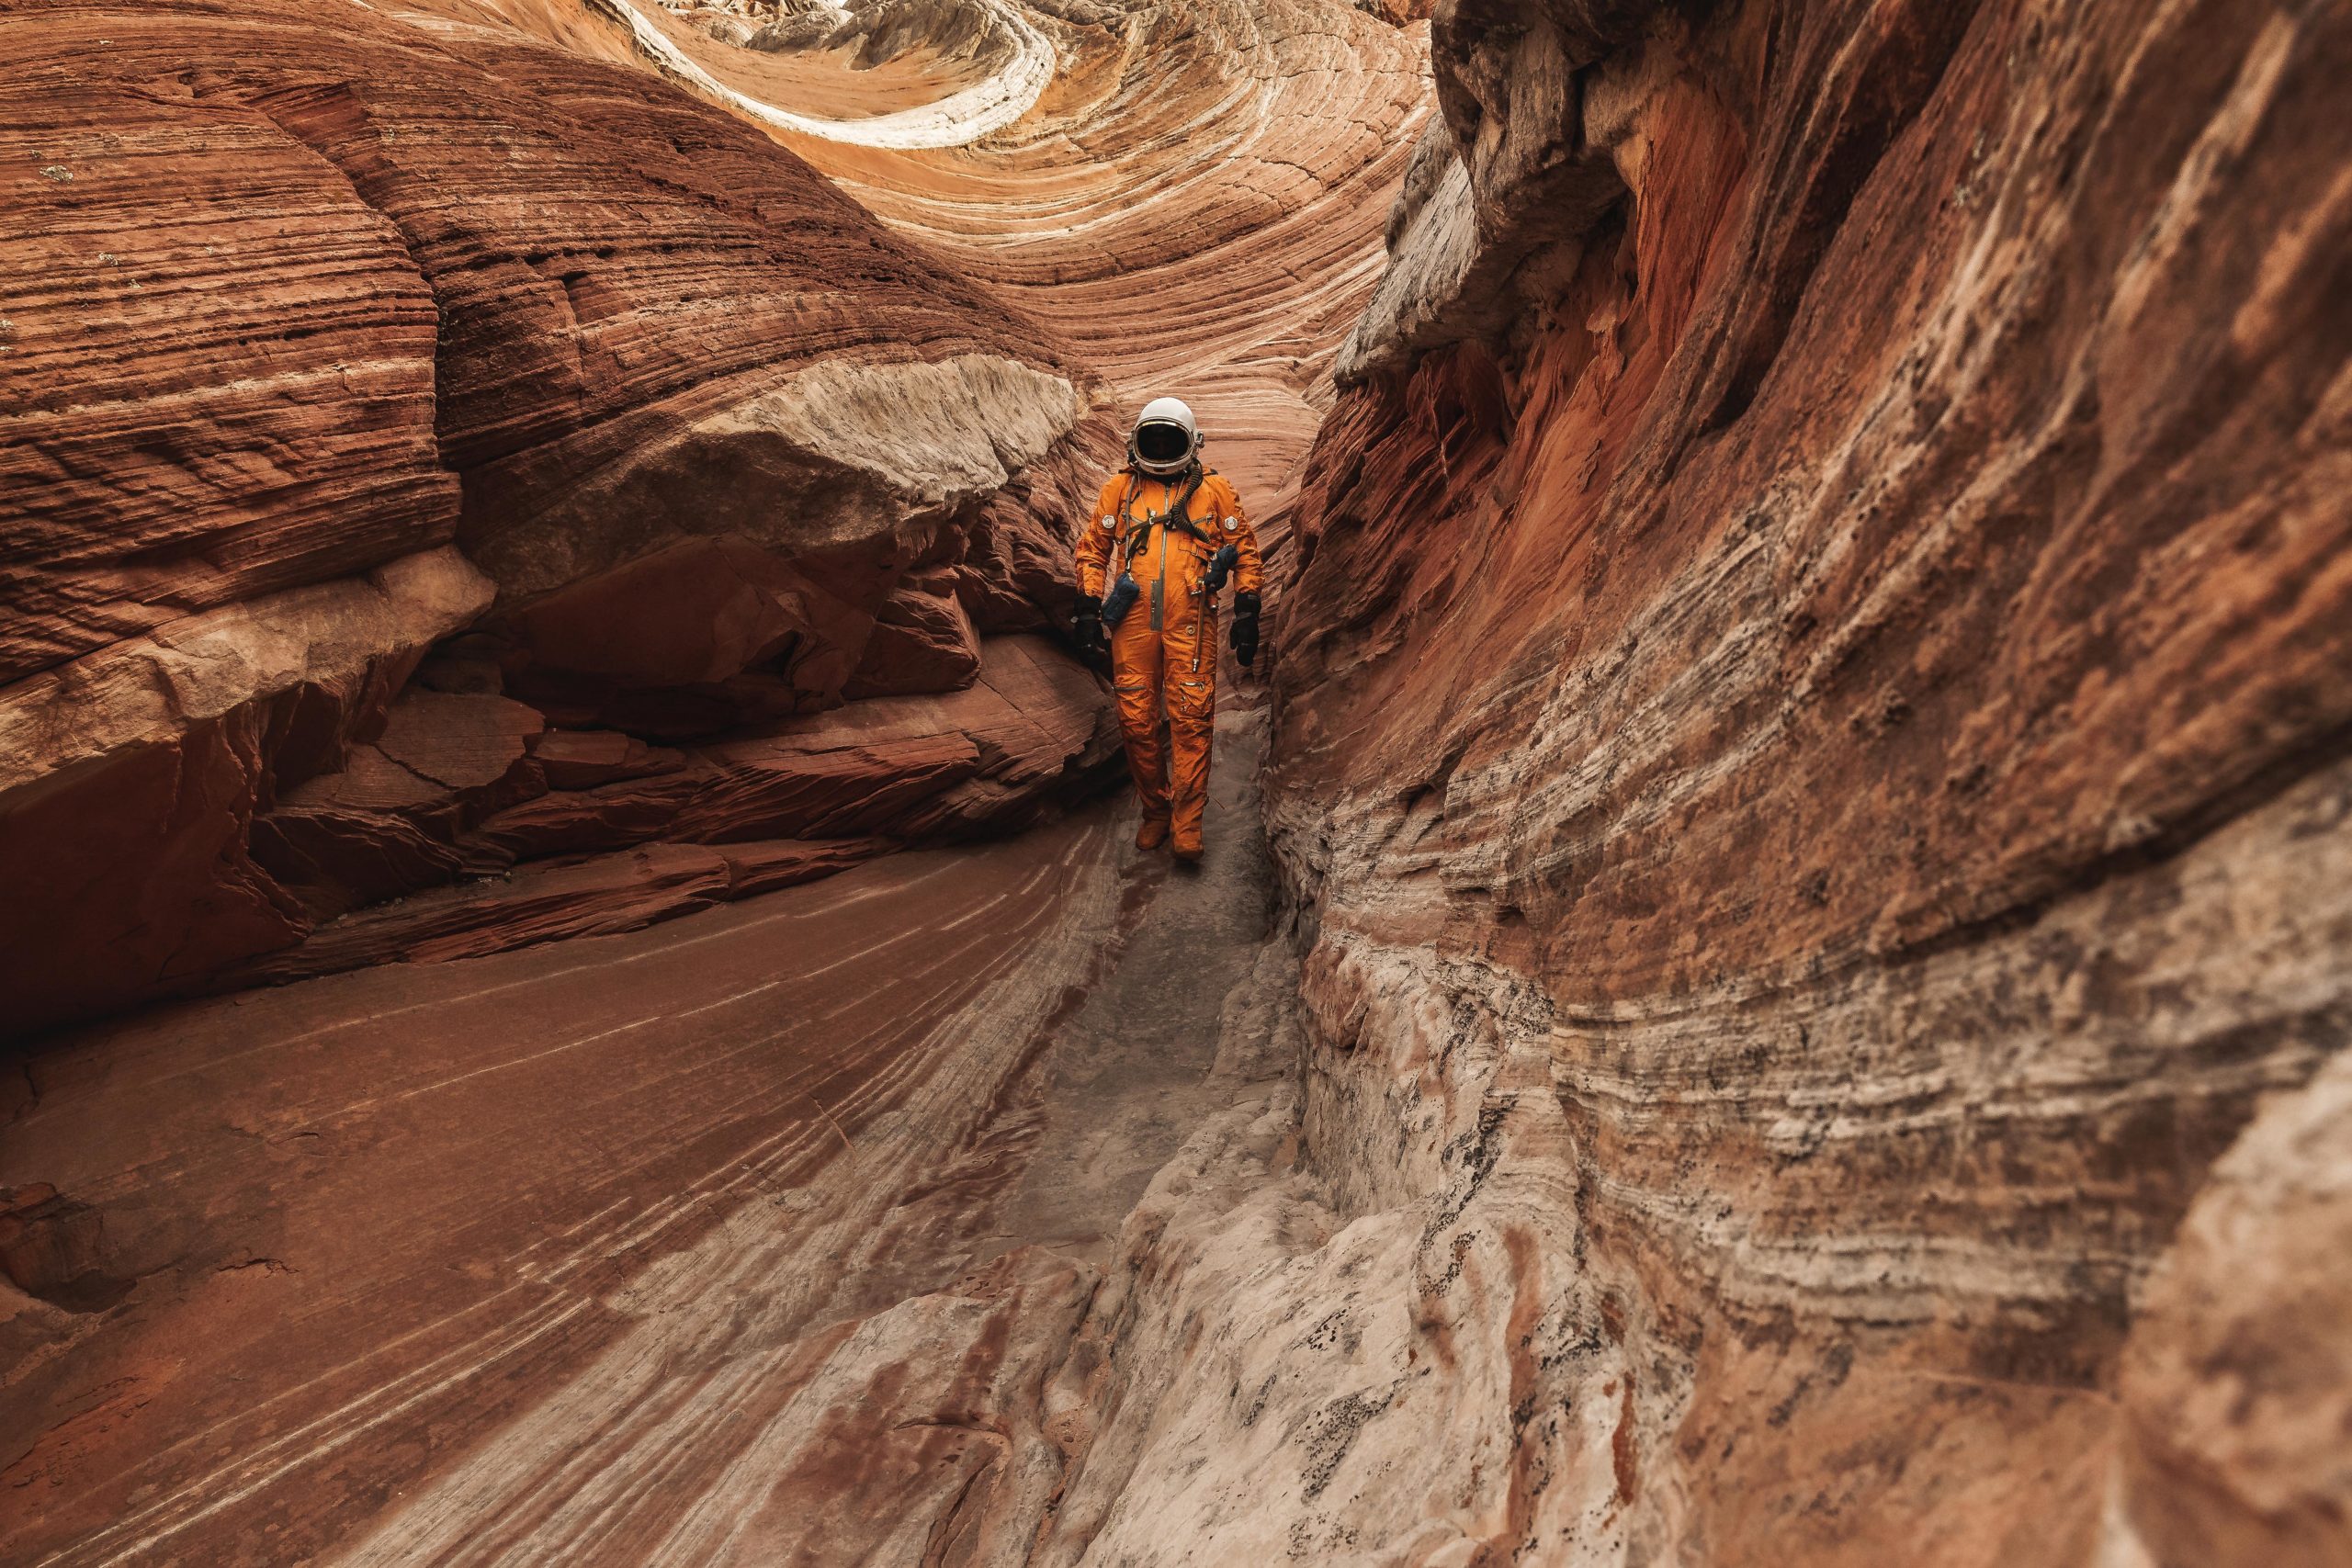 Photography of an astronaut wearing on orange space suit walking on planet Mars.